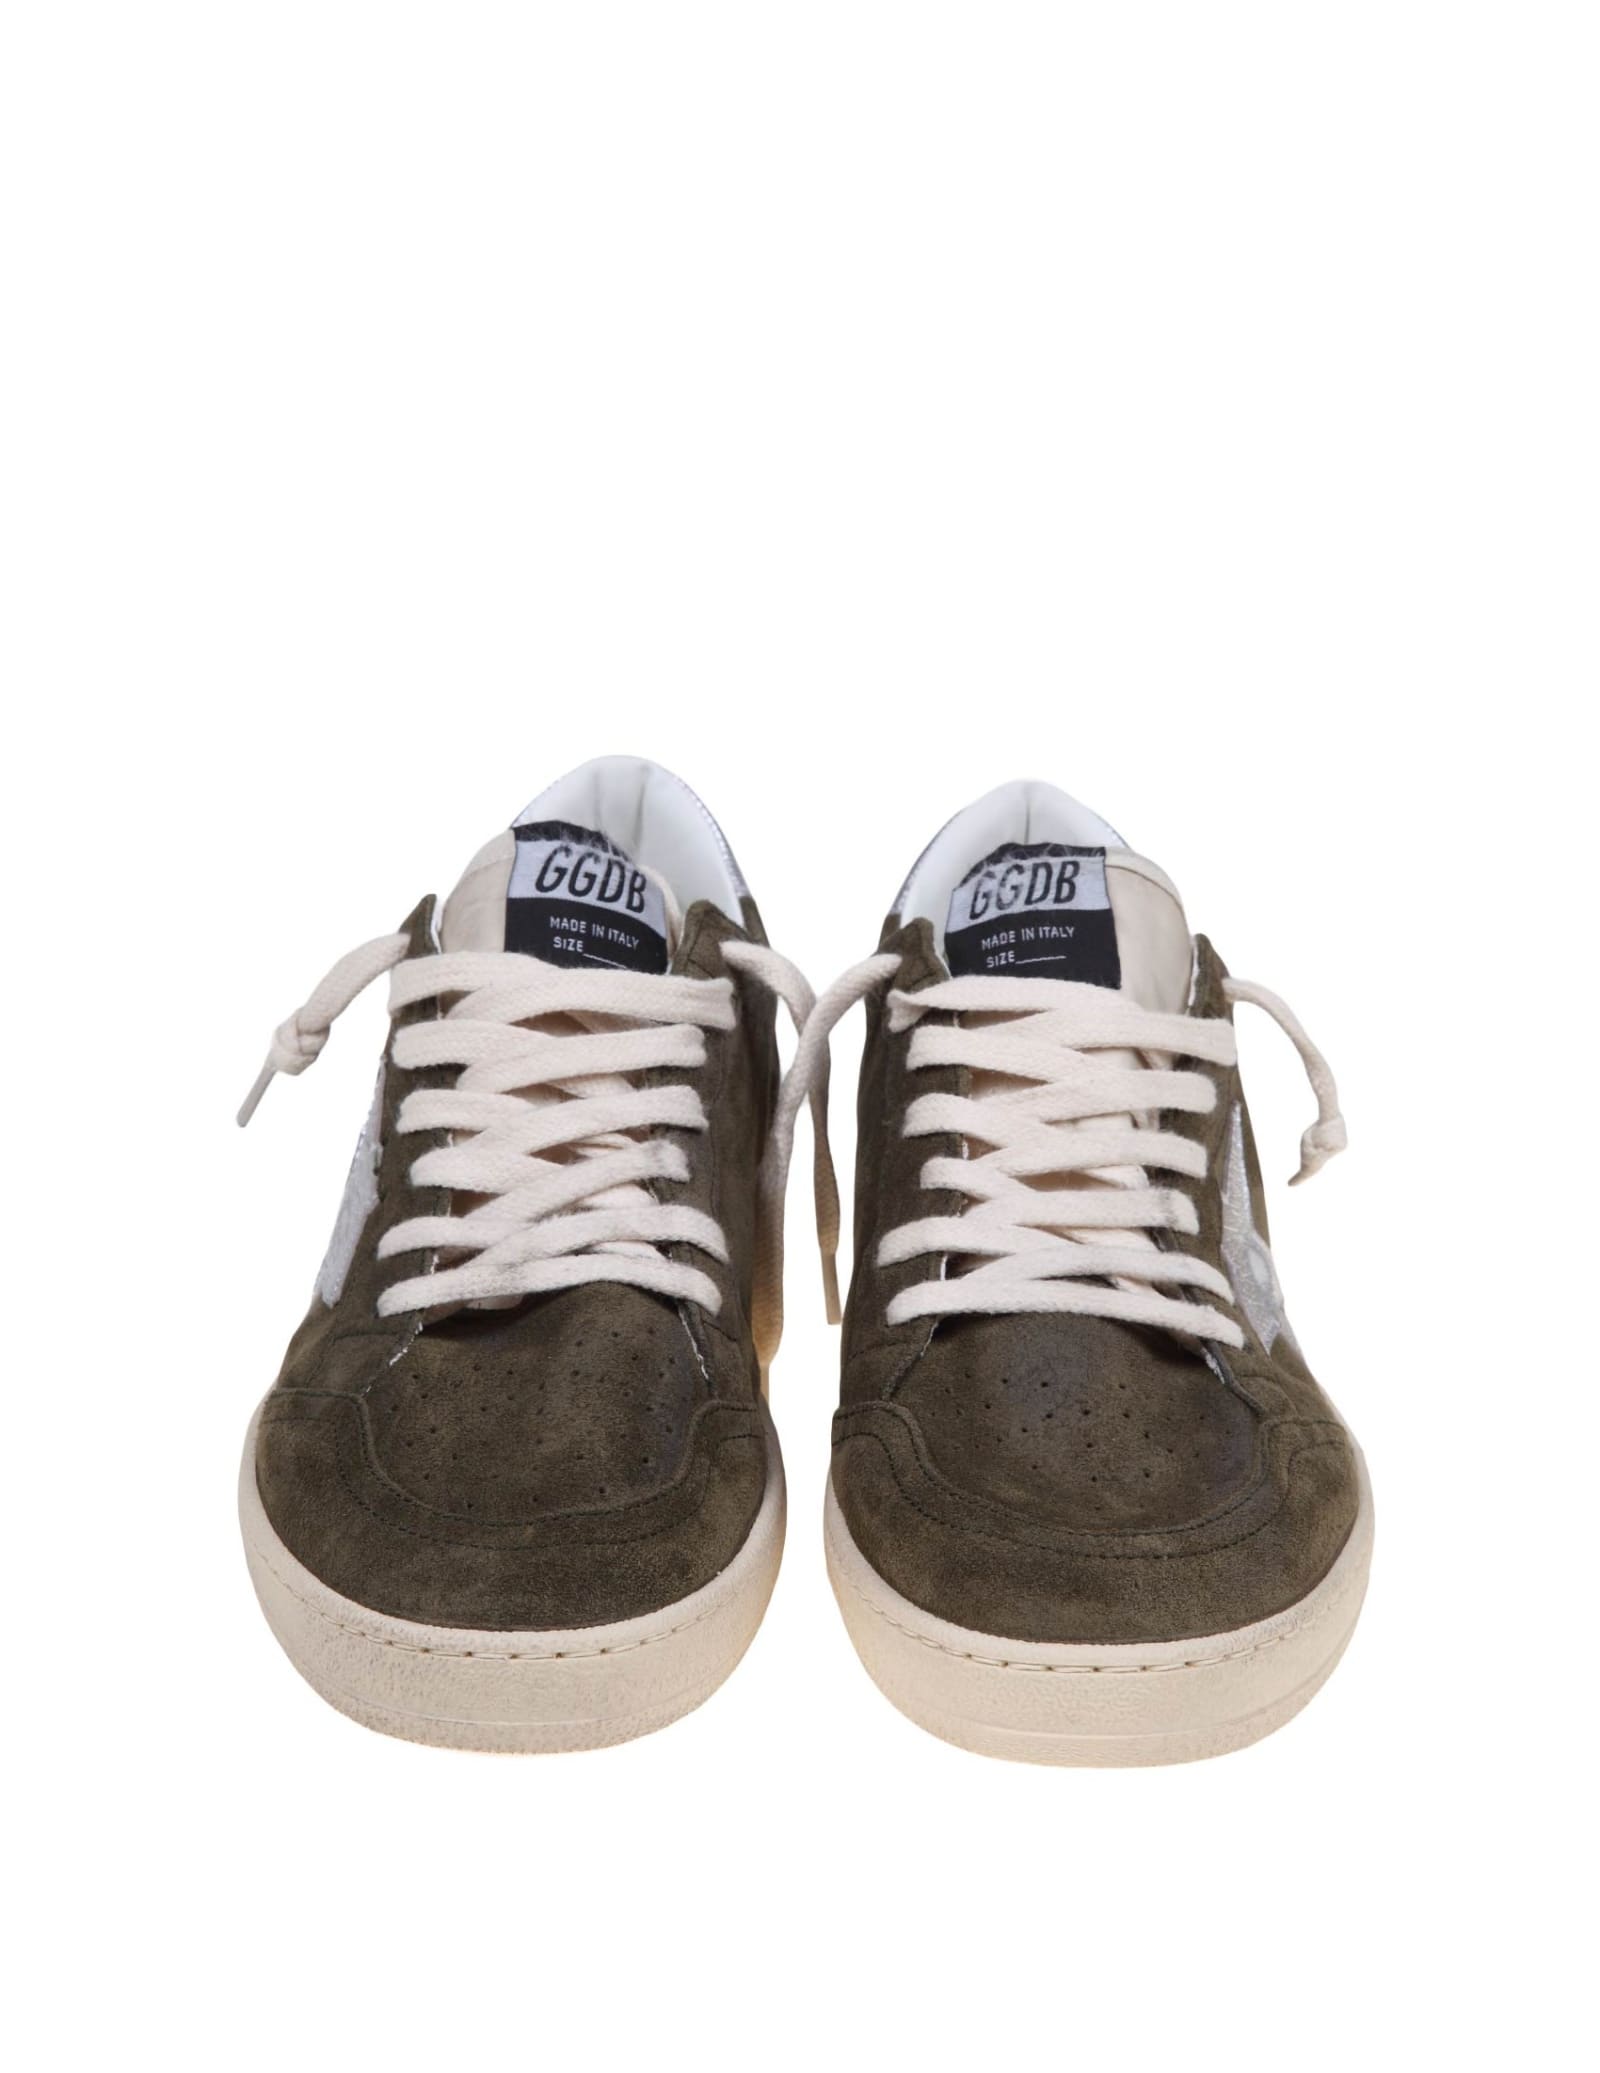 Shop Golden Goose Ball Star Sneakers In Olive Green Suede In Olive Night/silver